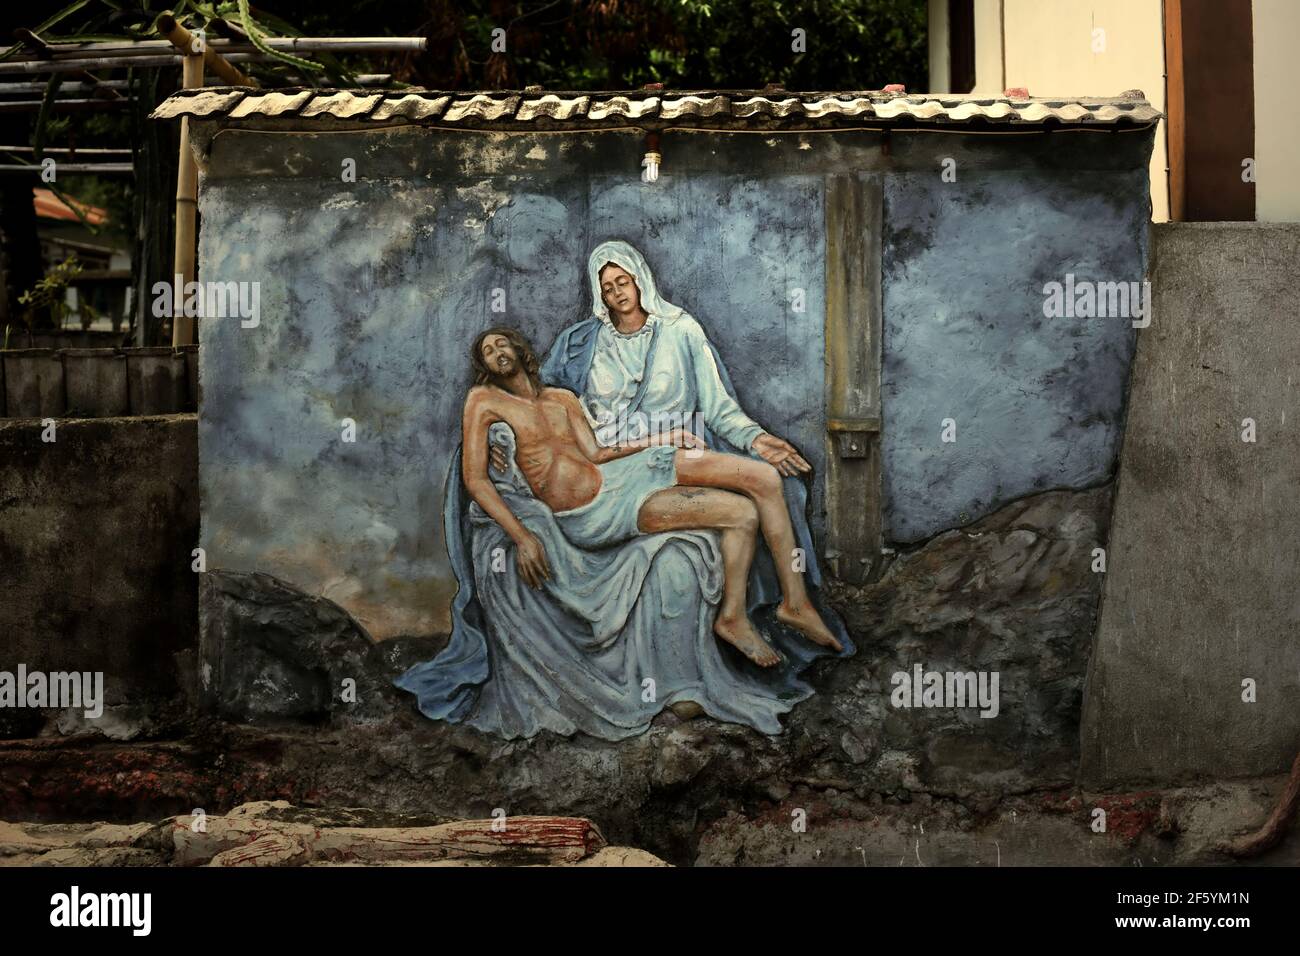 A bas-relief depicting Mother Mary cradling the dead body of Jesus, created by unidentified artist on a wall near the St Ignatius Loyola church, Sikka. Stock Photo